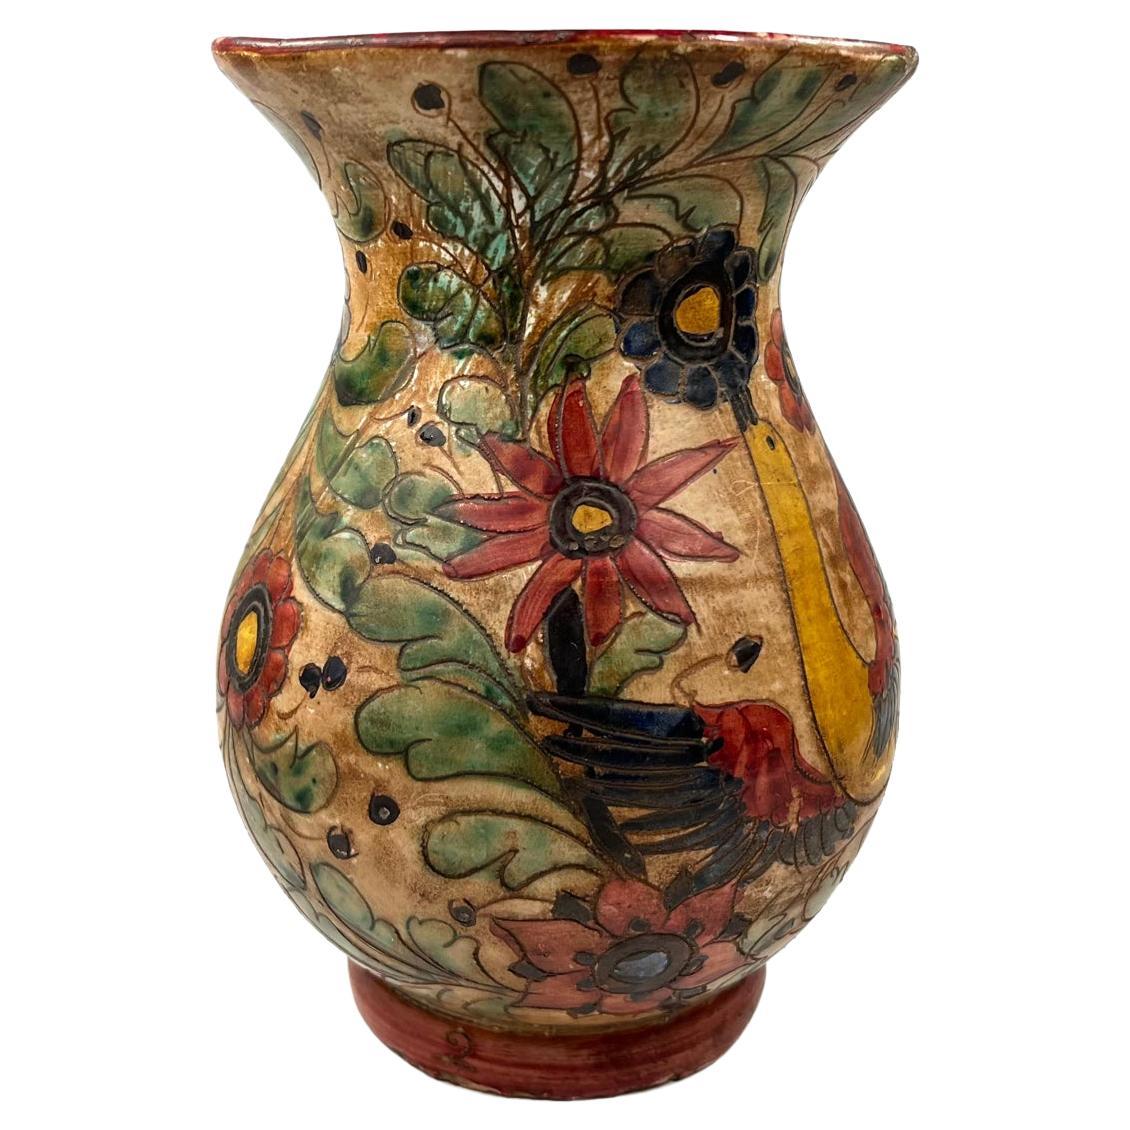  Italian Hand Painted Pottery Vase with Flowers and Birds Circa 19th C.